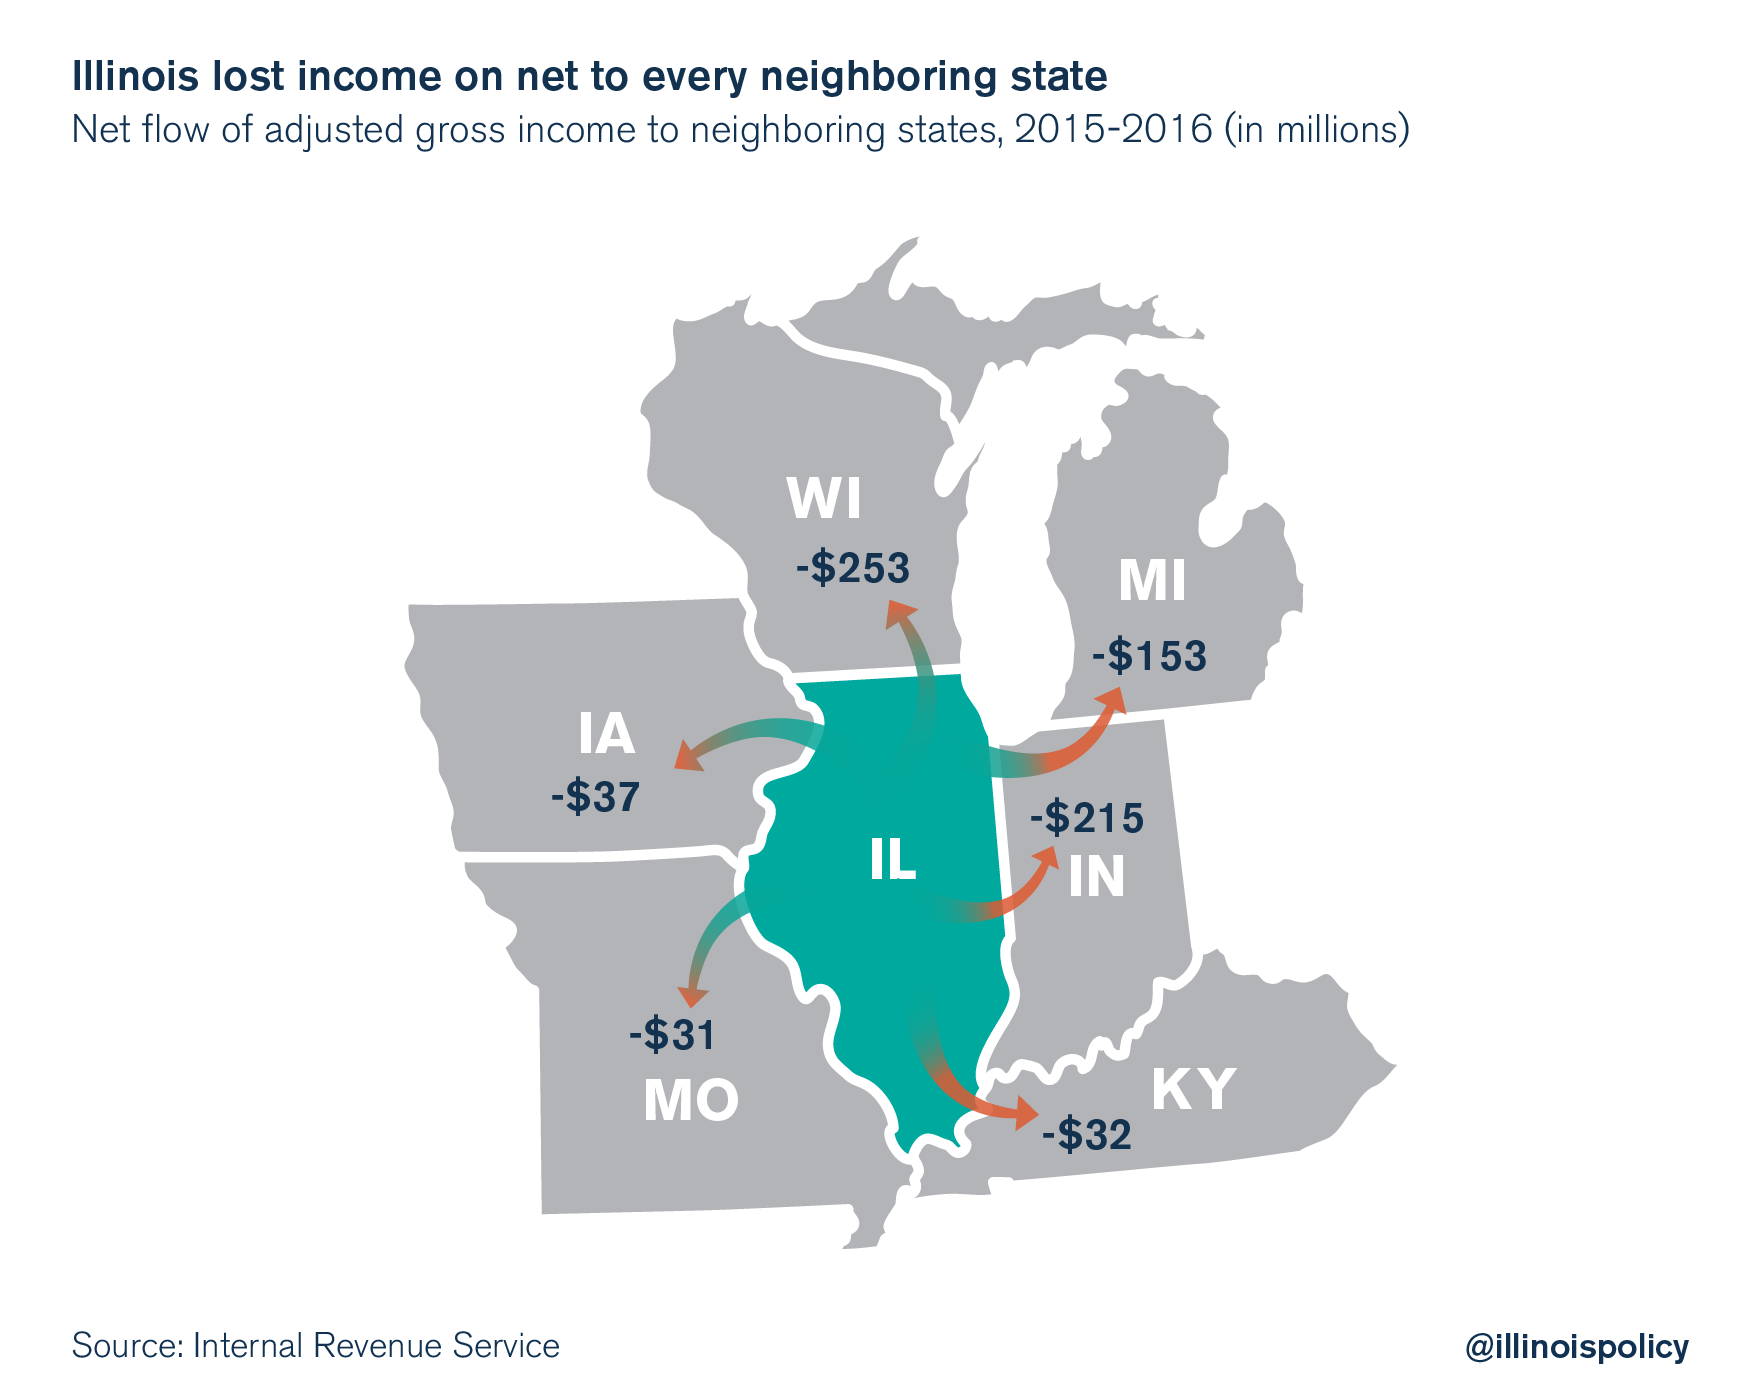 Illinois lost income on net to every neighboring state